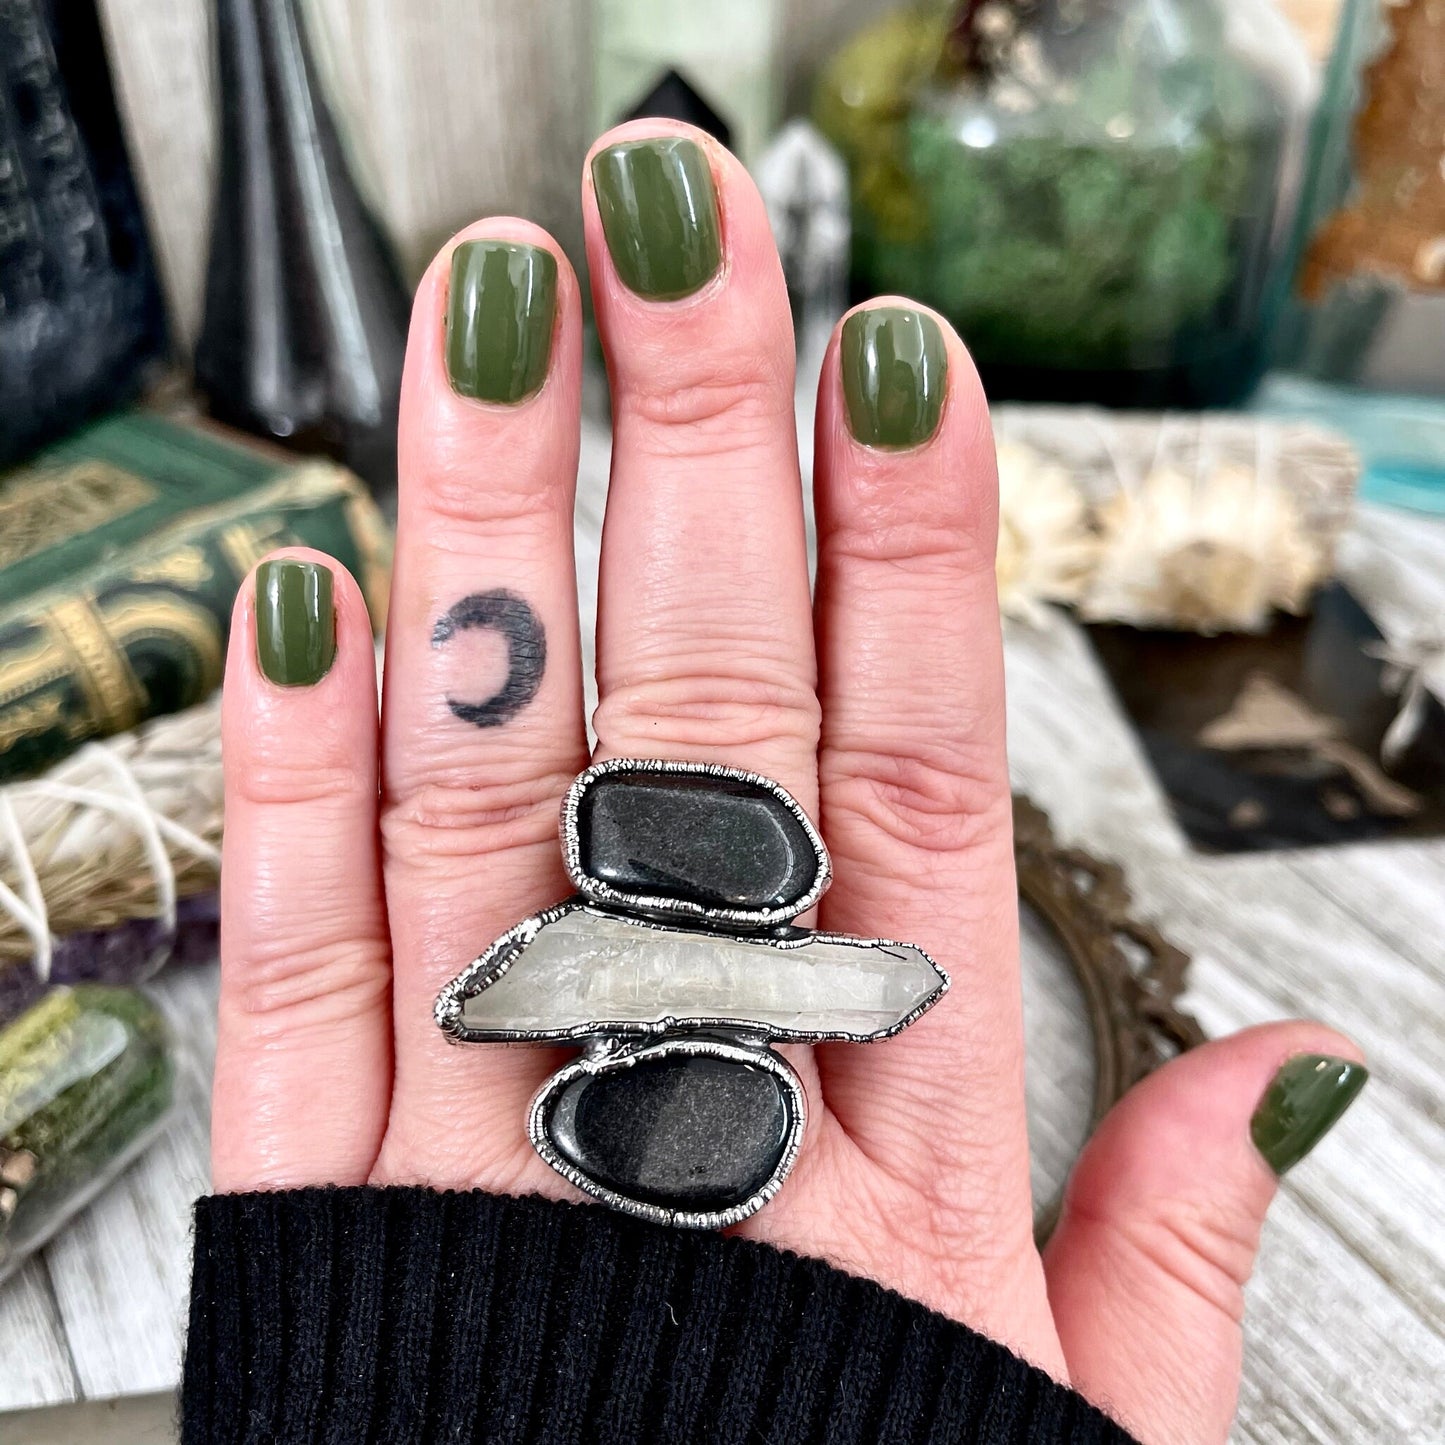 Size 9 Crystal Ring - Three Stone Ring Black Onyx Clear Raw Quartz Ring in Silver / Foxlark Collection - One of a Kind / Big Crystal Jewelry